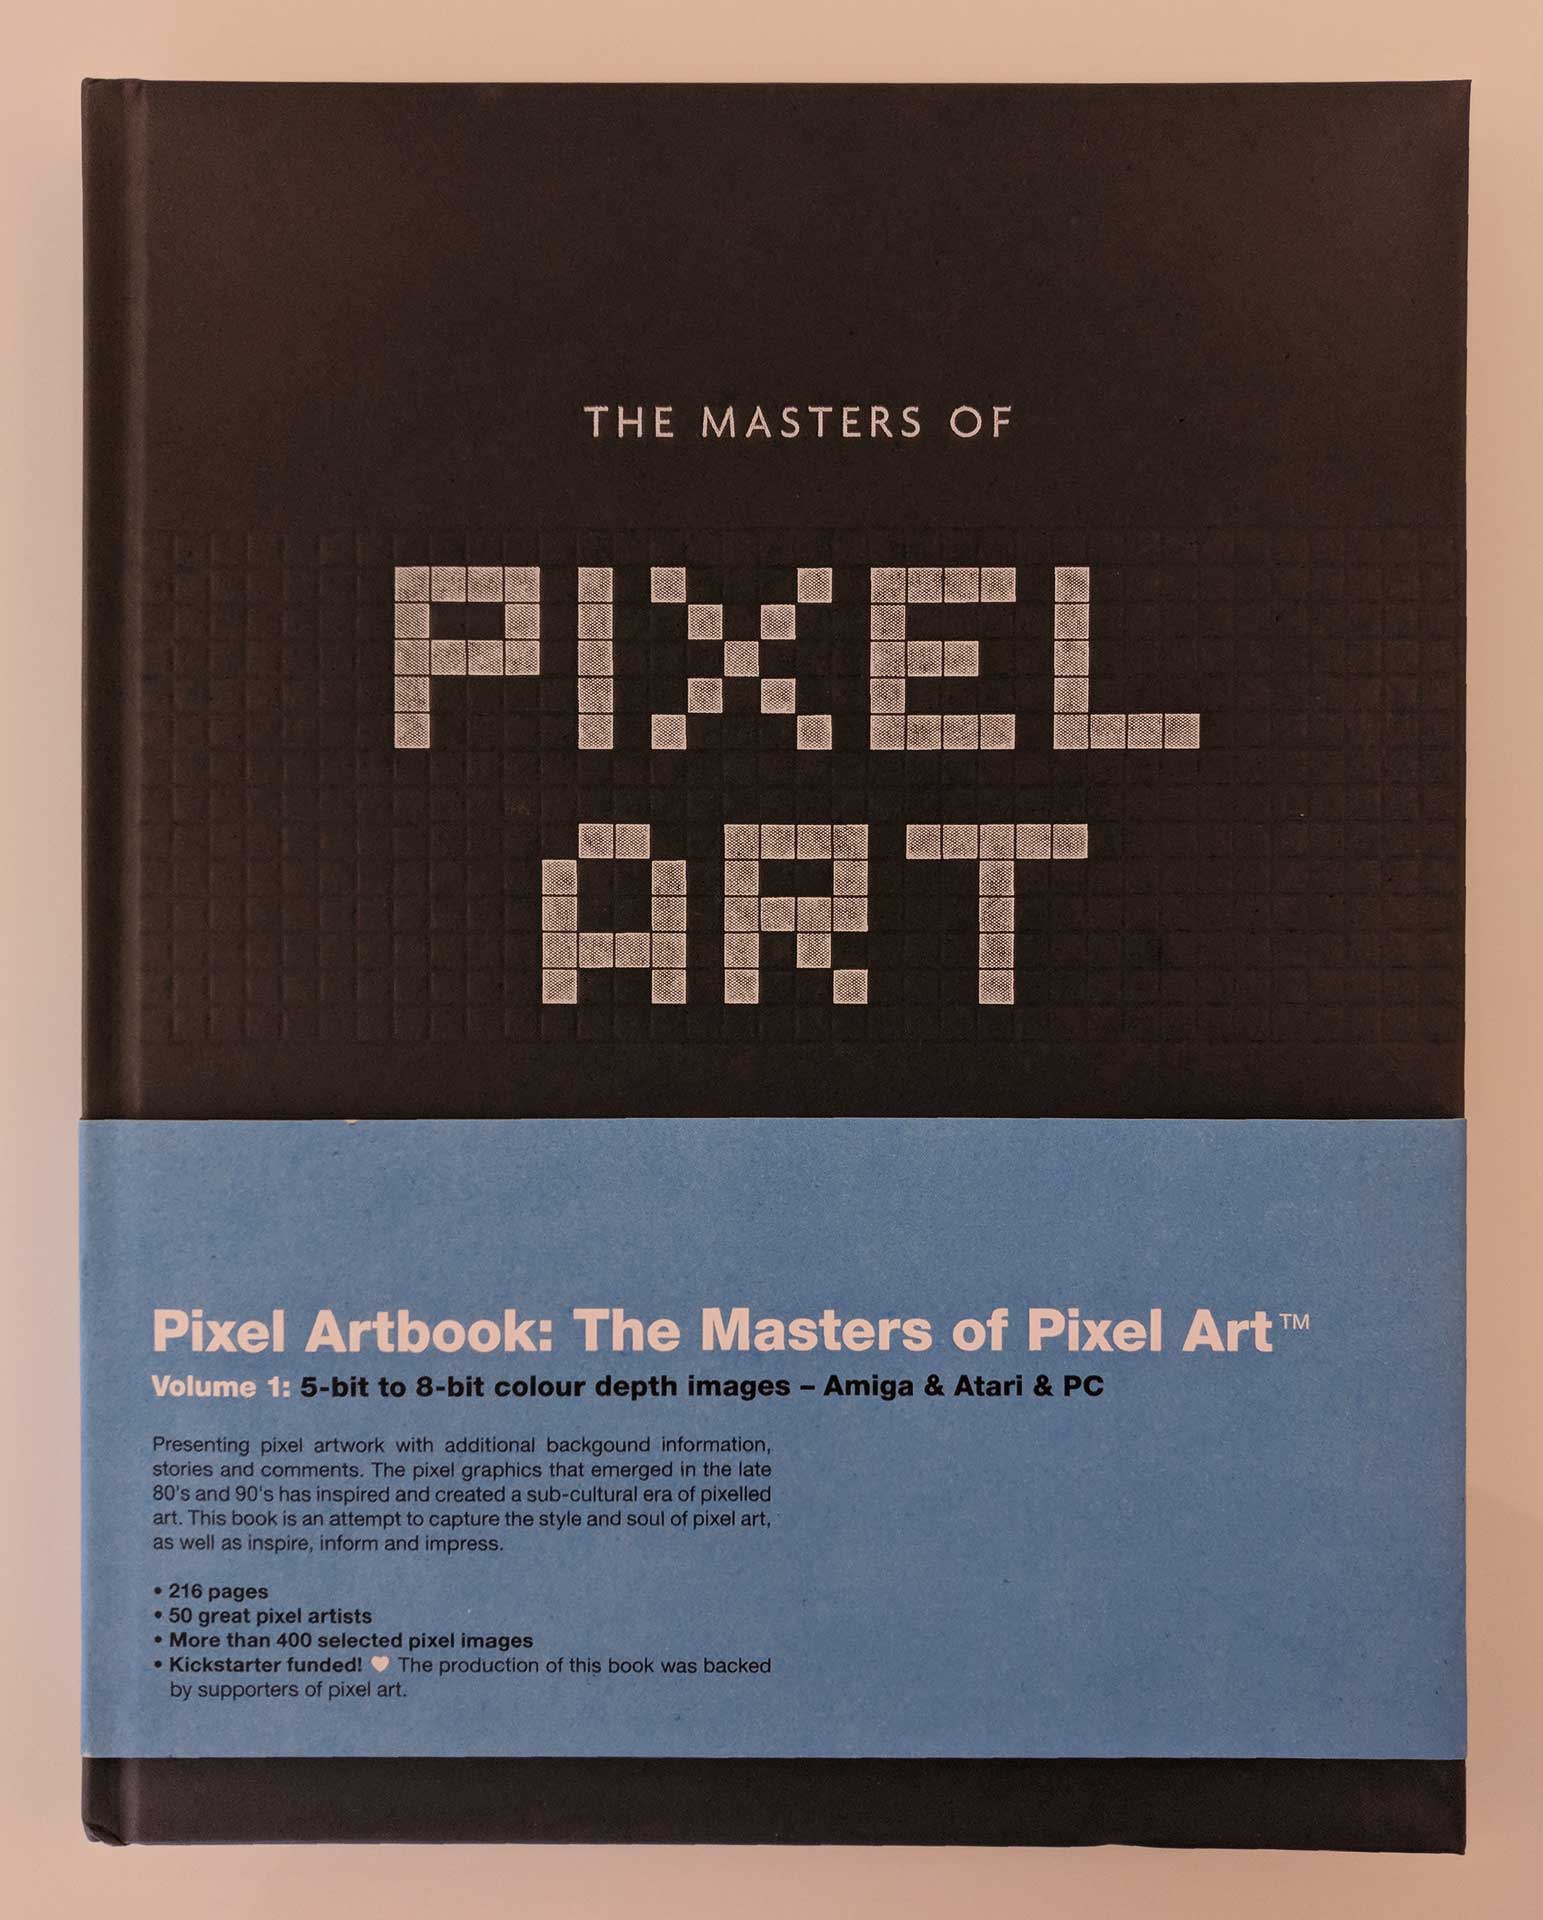 The Masters of Pixel Art